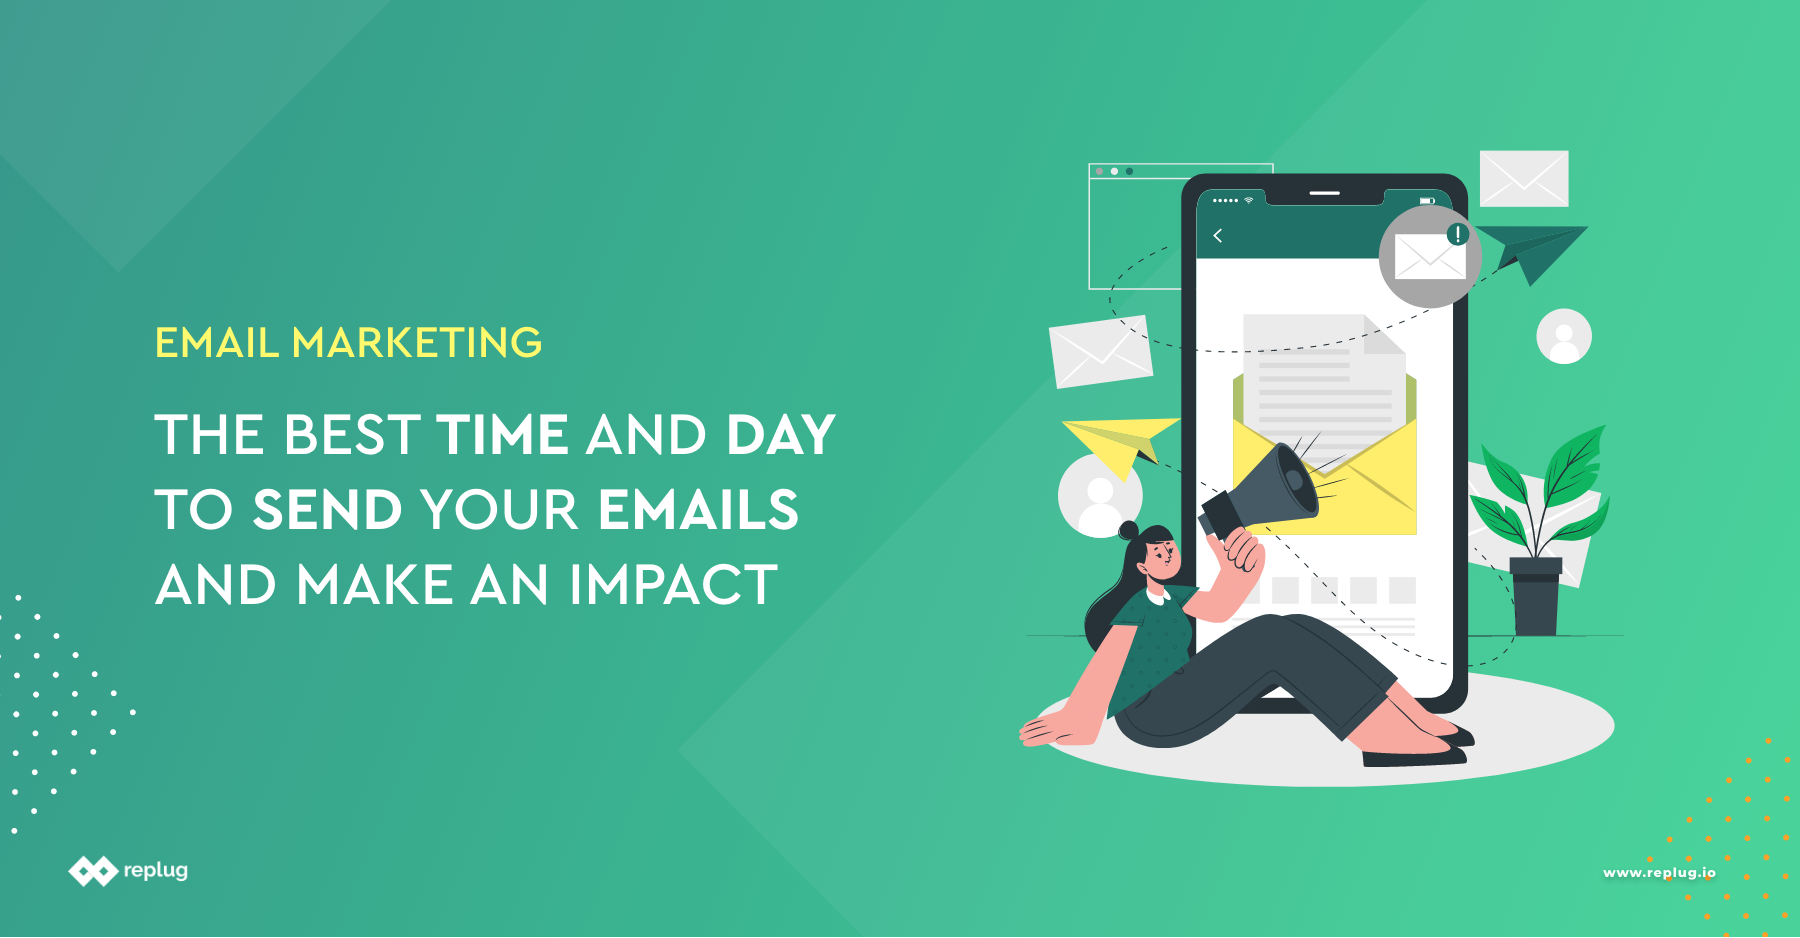 Email Marketing: The Best Time And Day To Send Your emails And Make An Impact